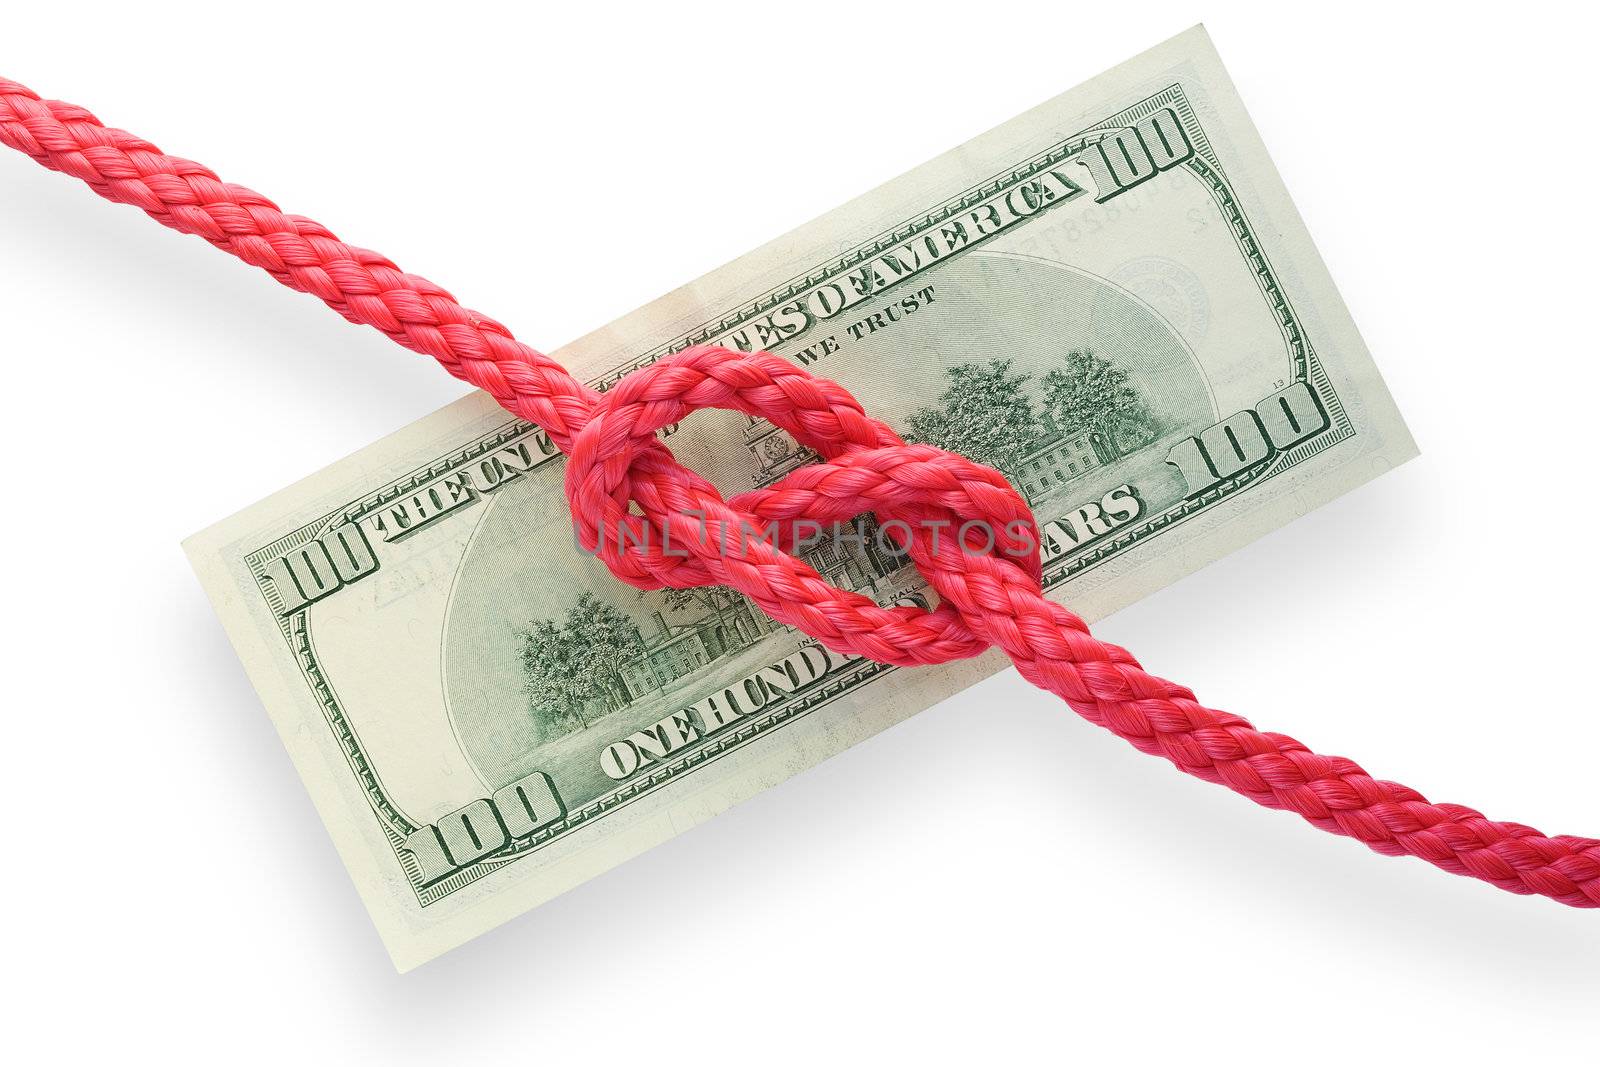 The red cord with reef knot on a banknote. Isolated on white. Conception of risk or difficulty.